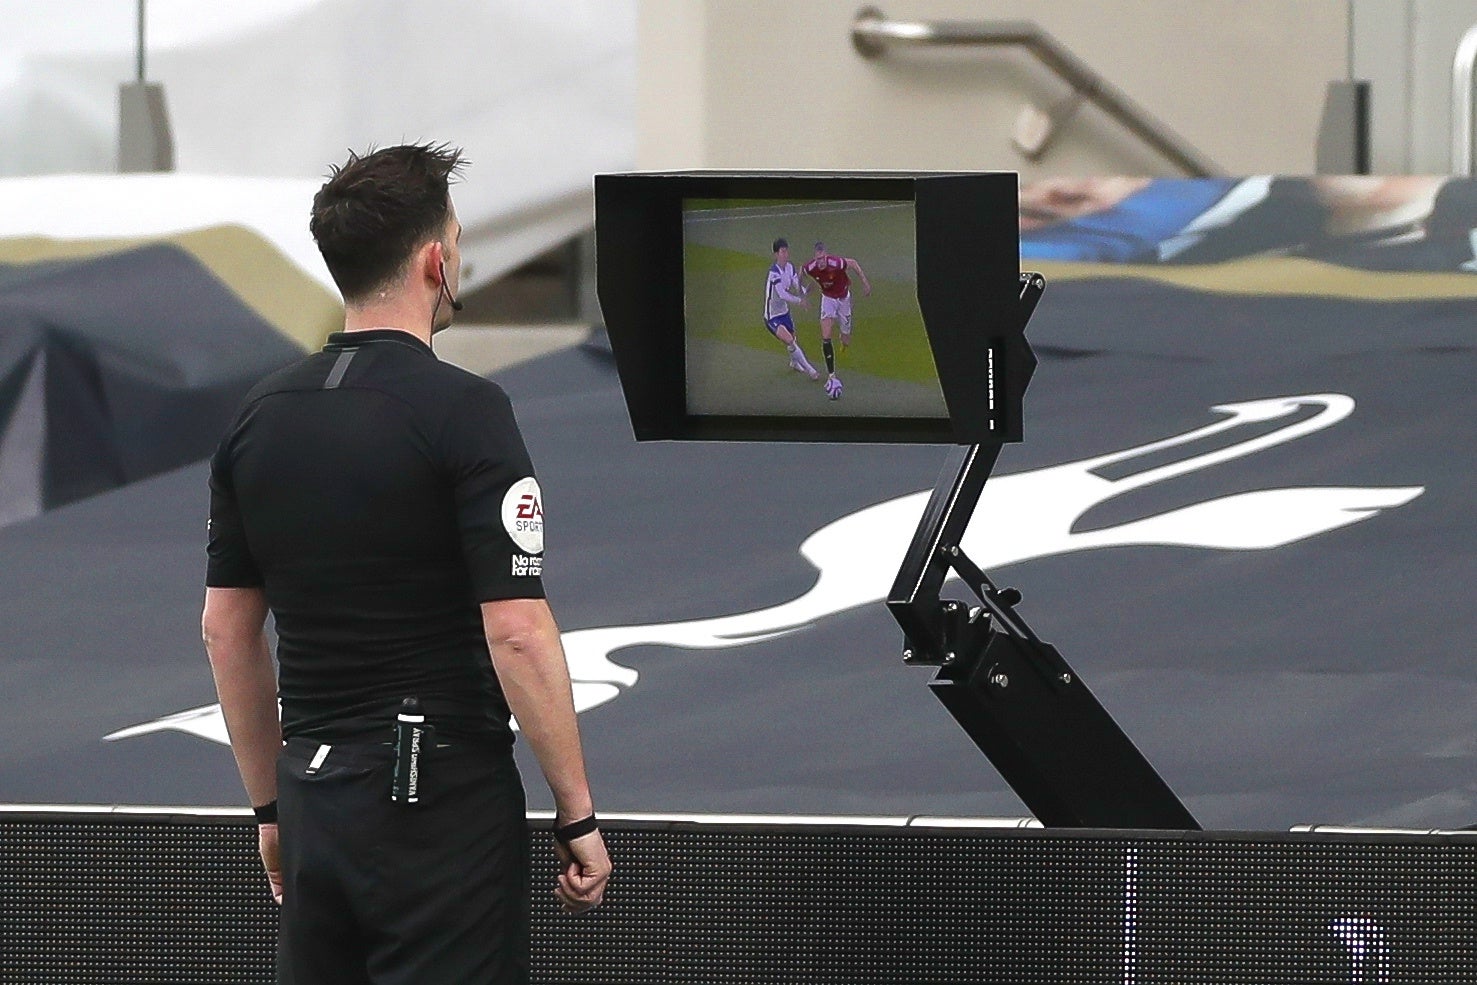 Chris Kavanagh looks at the incident on his pitchside monitor